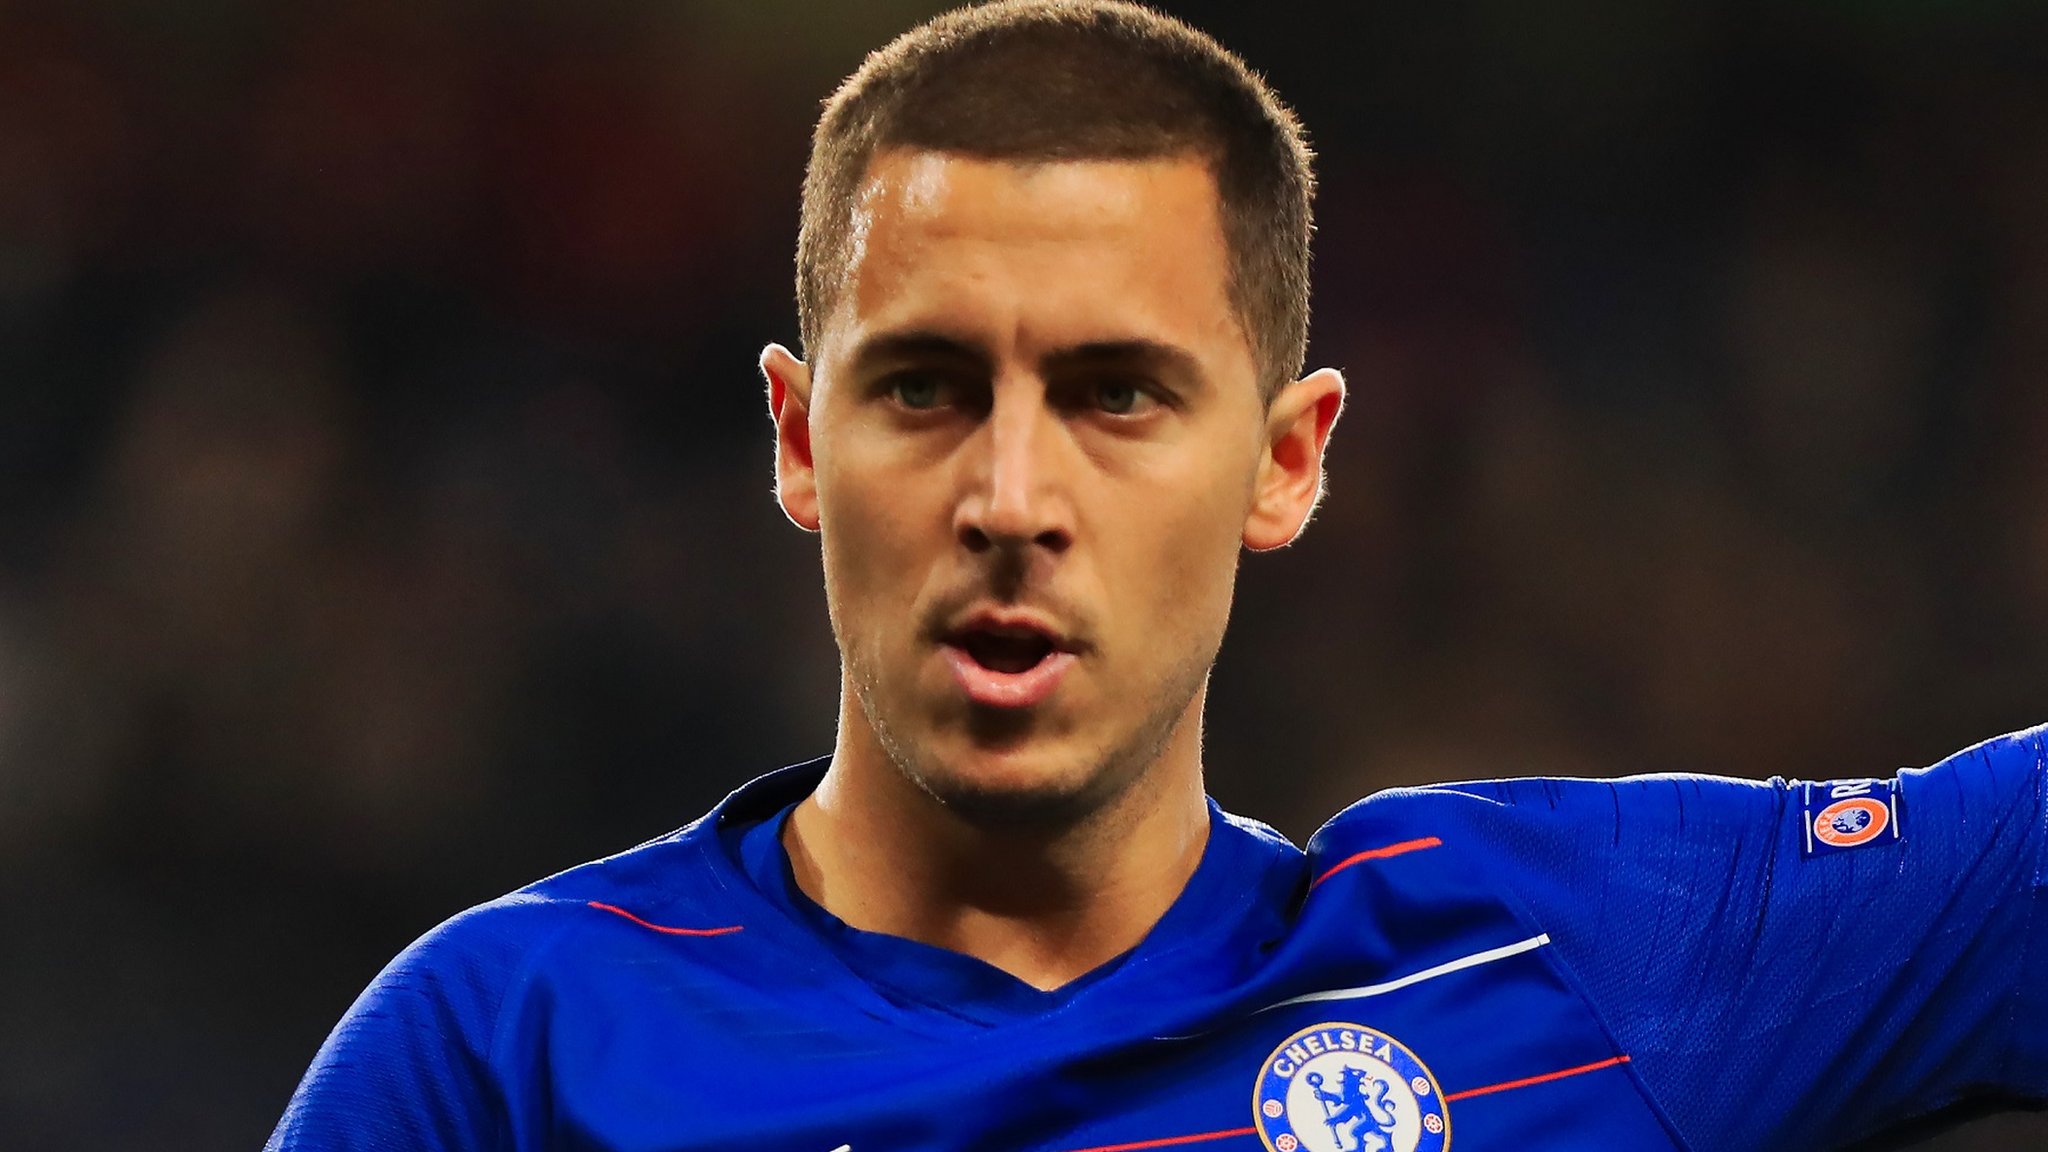 Gossip: Hazard would not force Real Madrid move